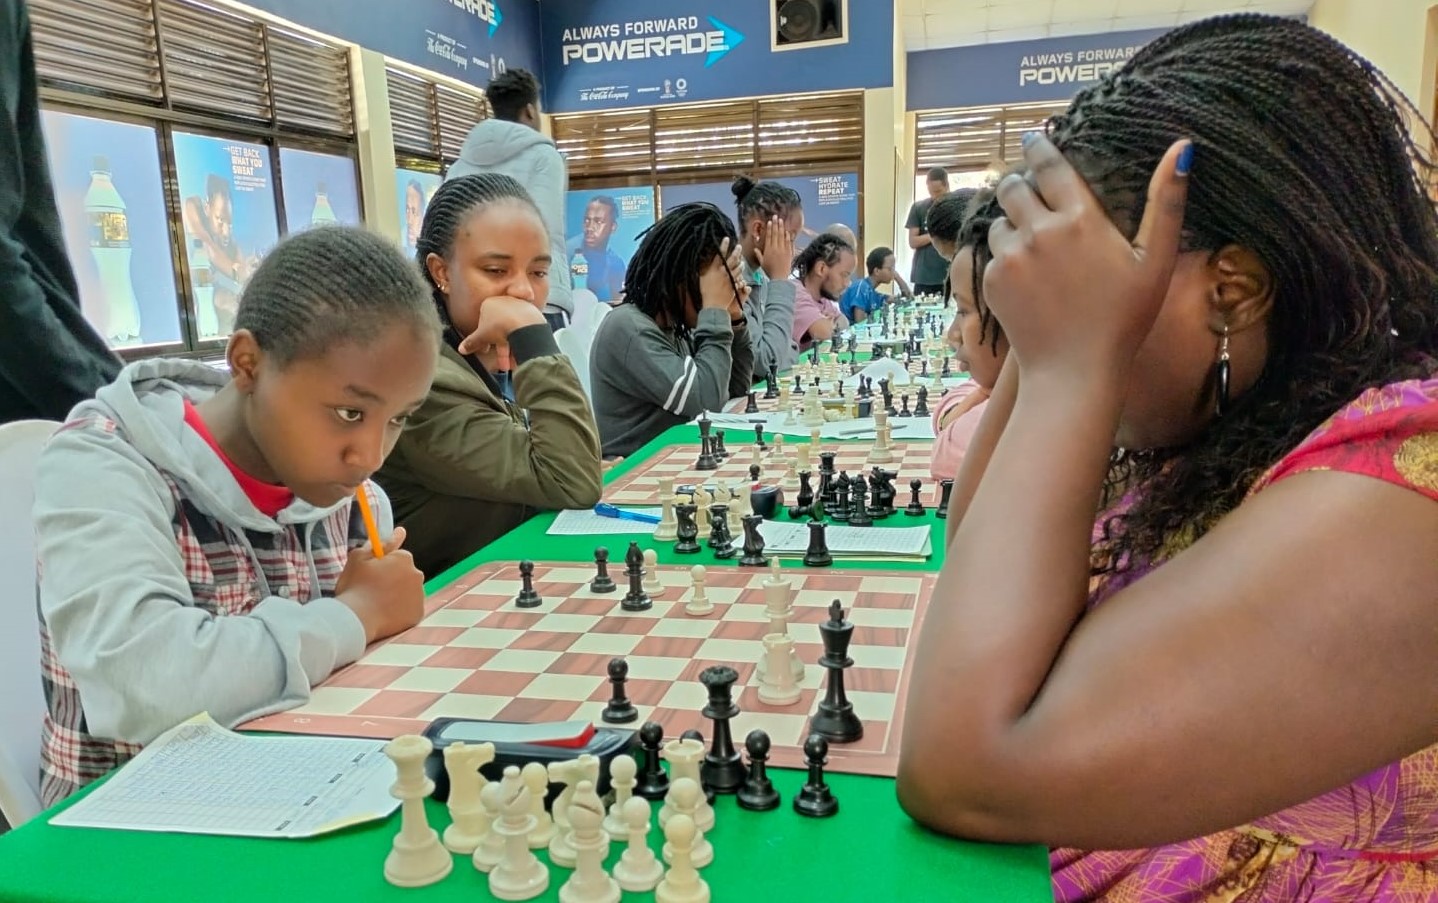 Elizabeth Cassidy (left) playing against WCM Joyce Nyaruai who had to dig deep to defeat her stubborn and young opponent.